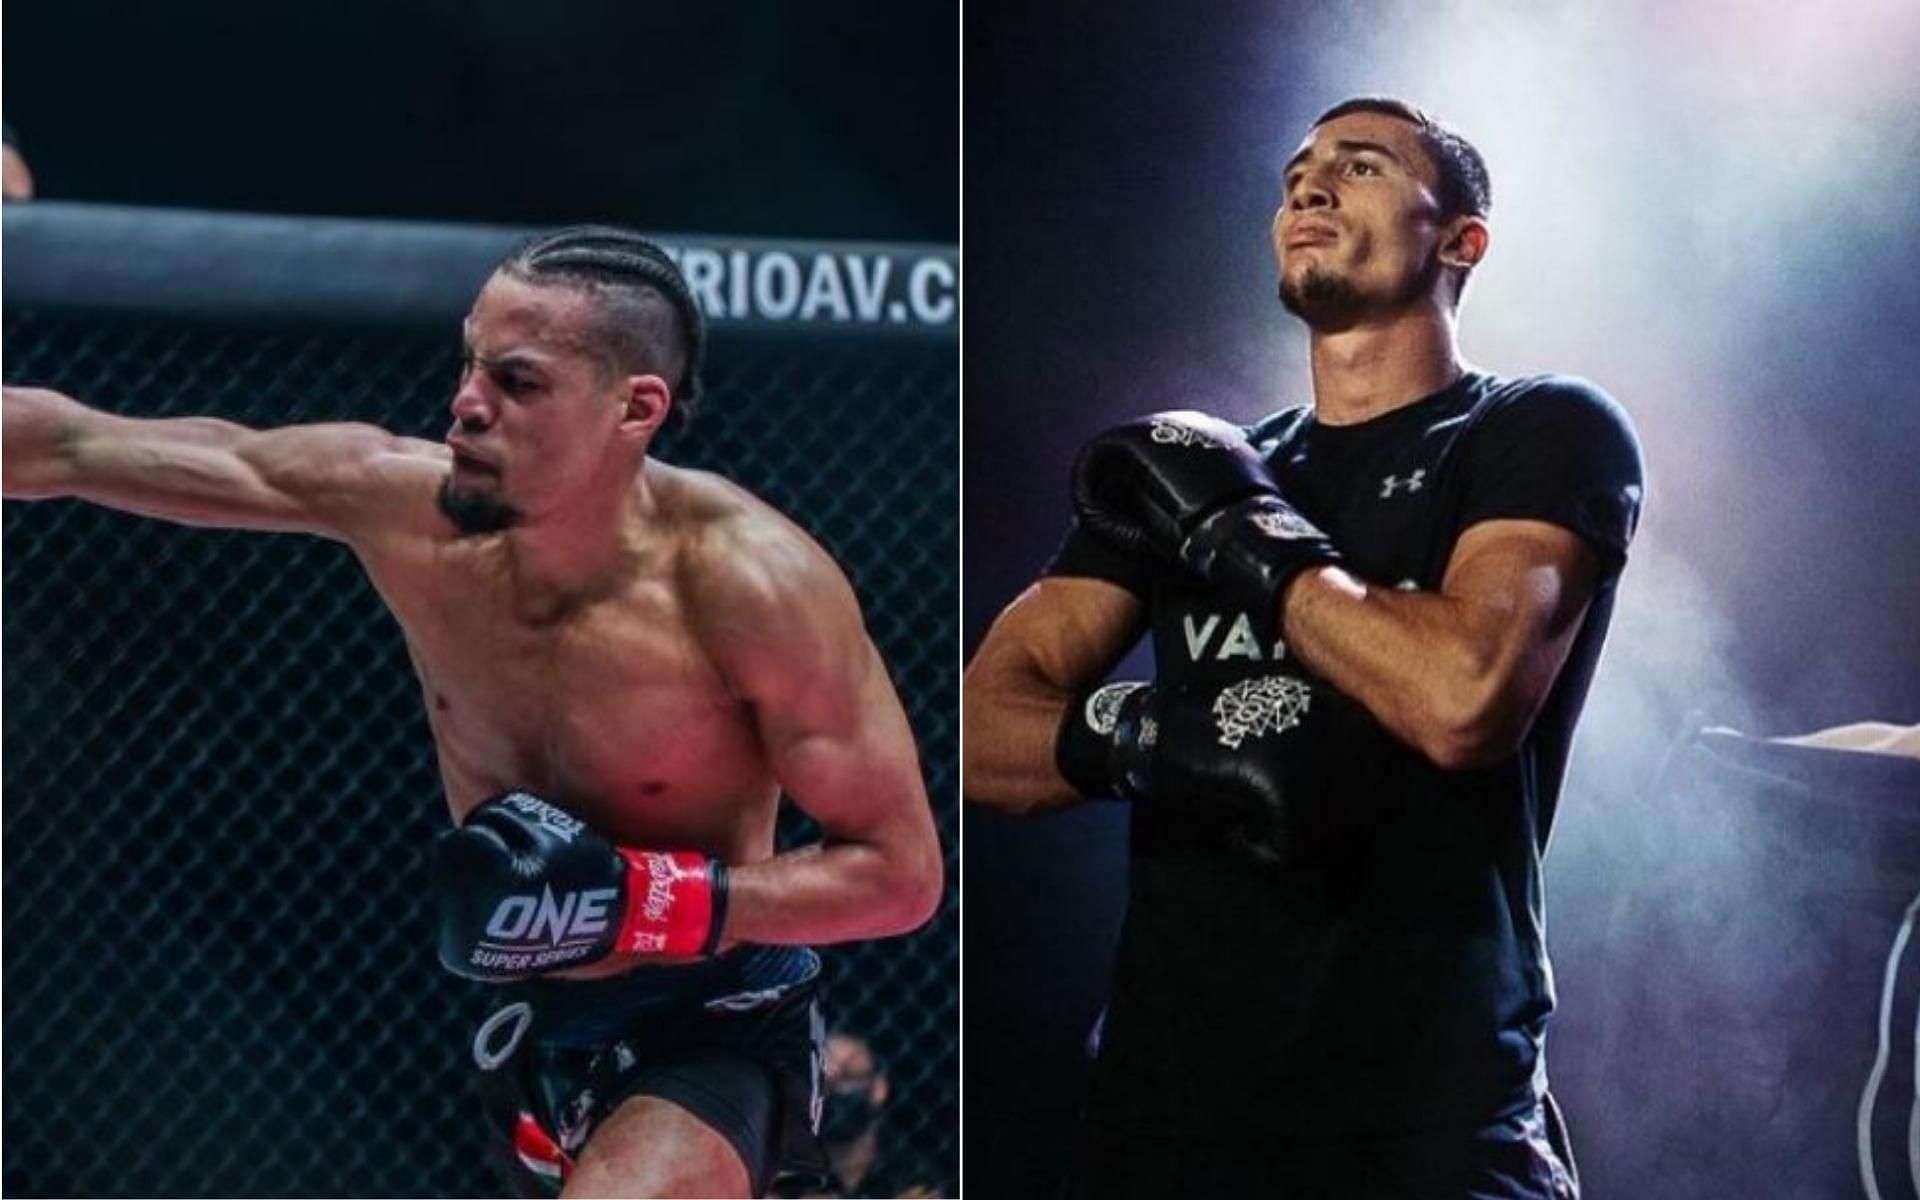 ONE Championship lightweight kickboxing champion Regian Eersel (left) faces promotional newcomer Islam Murtazaev (right) at ONE: Winter Warriors. (Images Credits: @koolhydraat and @islam_murtazaev on Instagram)